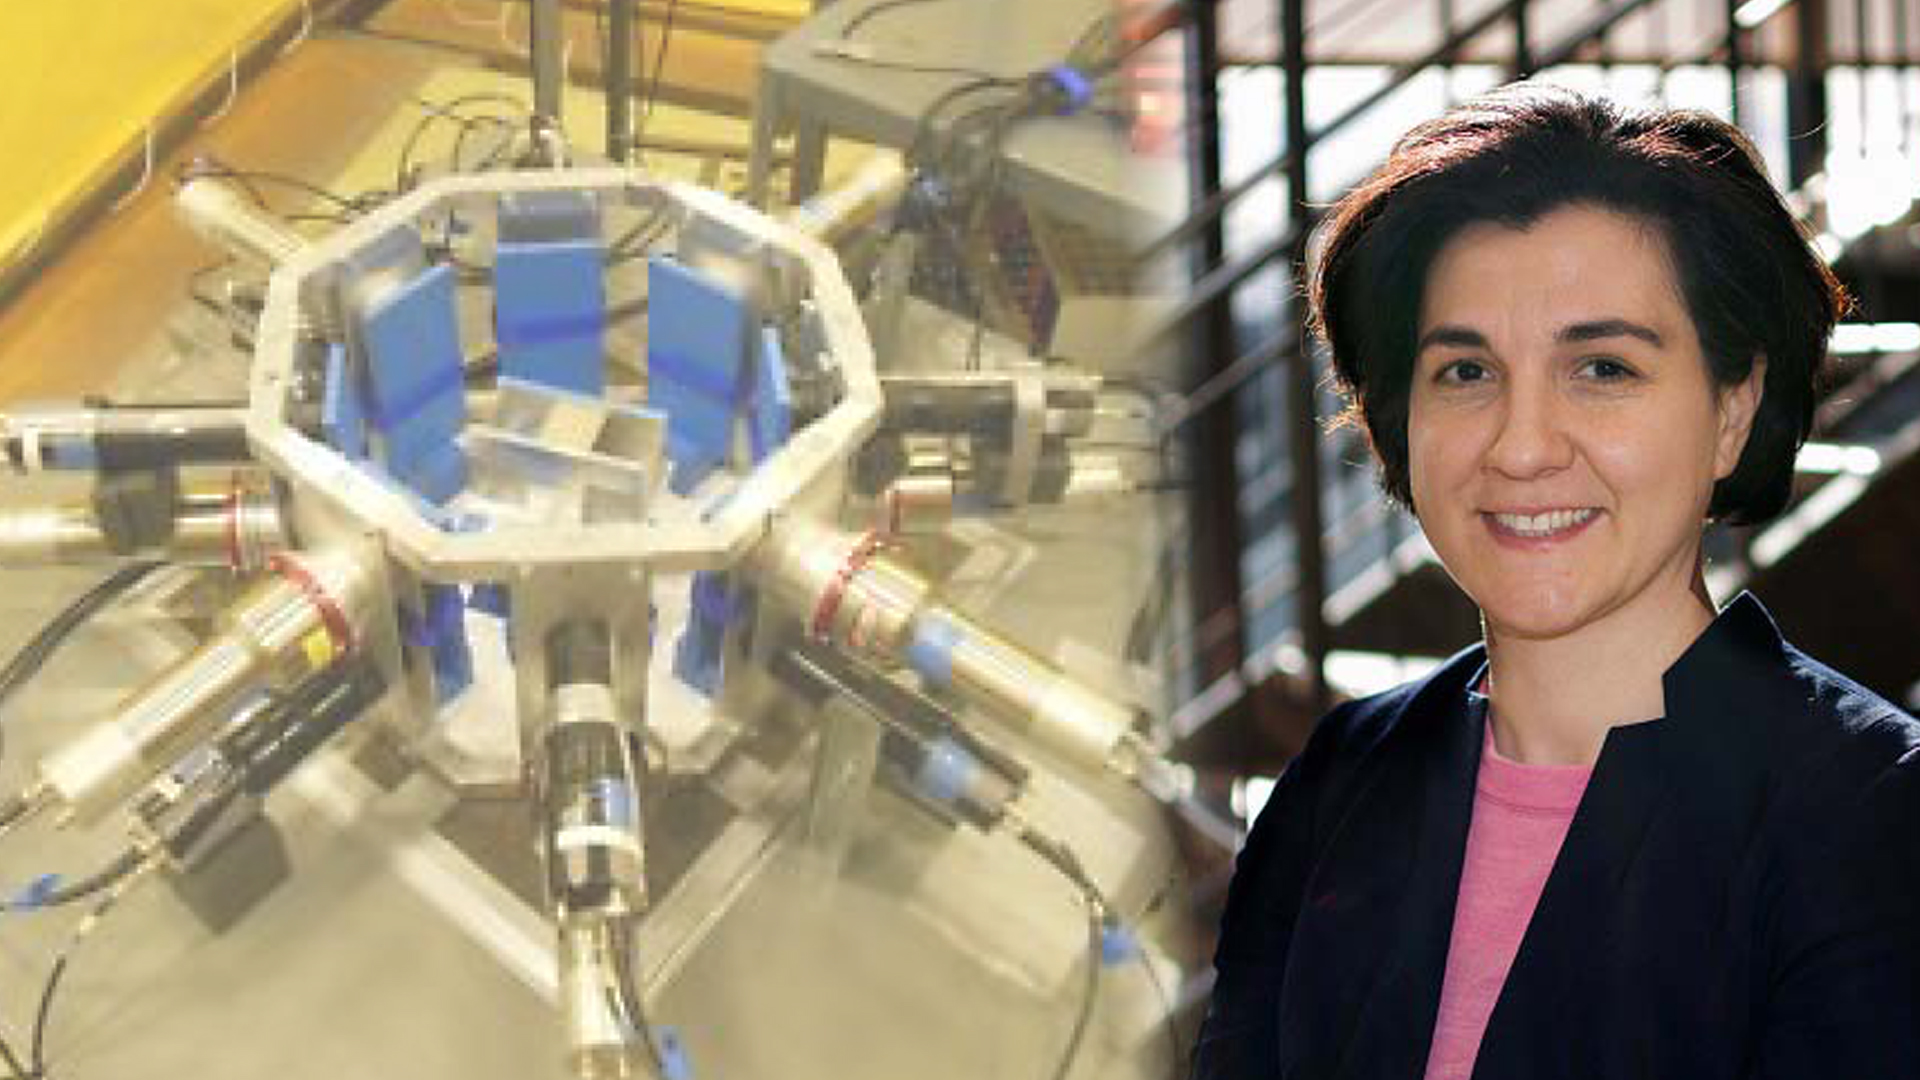 Expert in medical physics, nonproliferation, homeland security, joins NPRE faculty